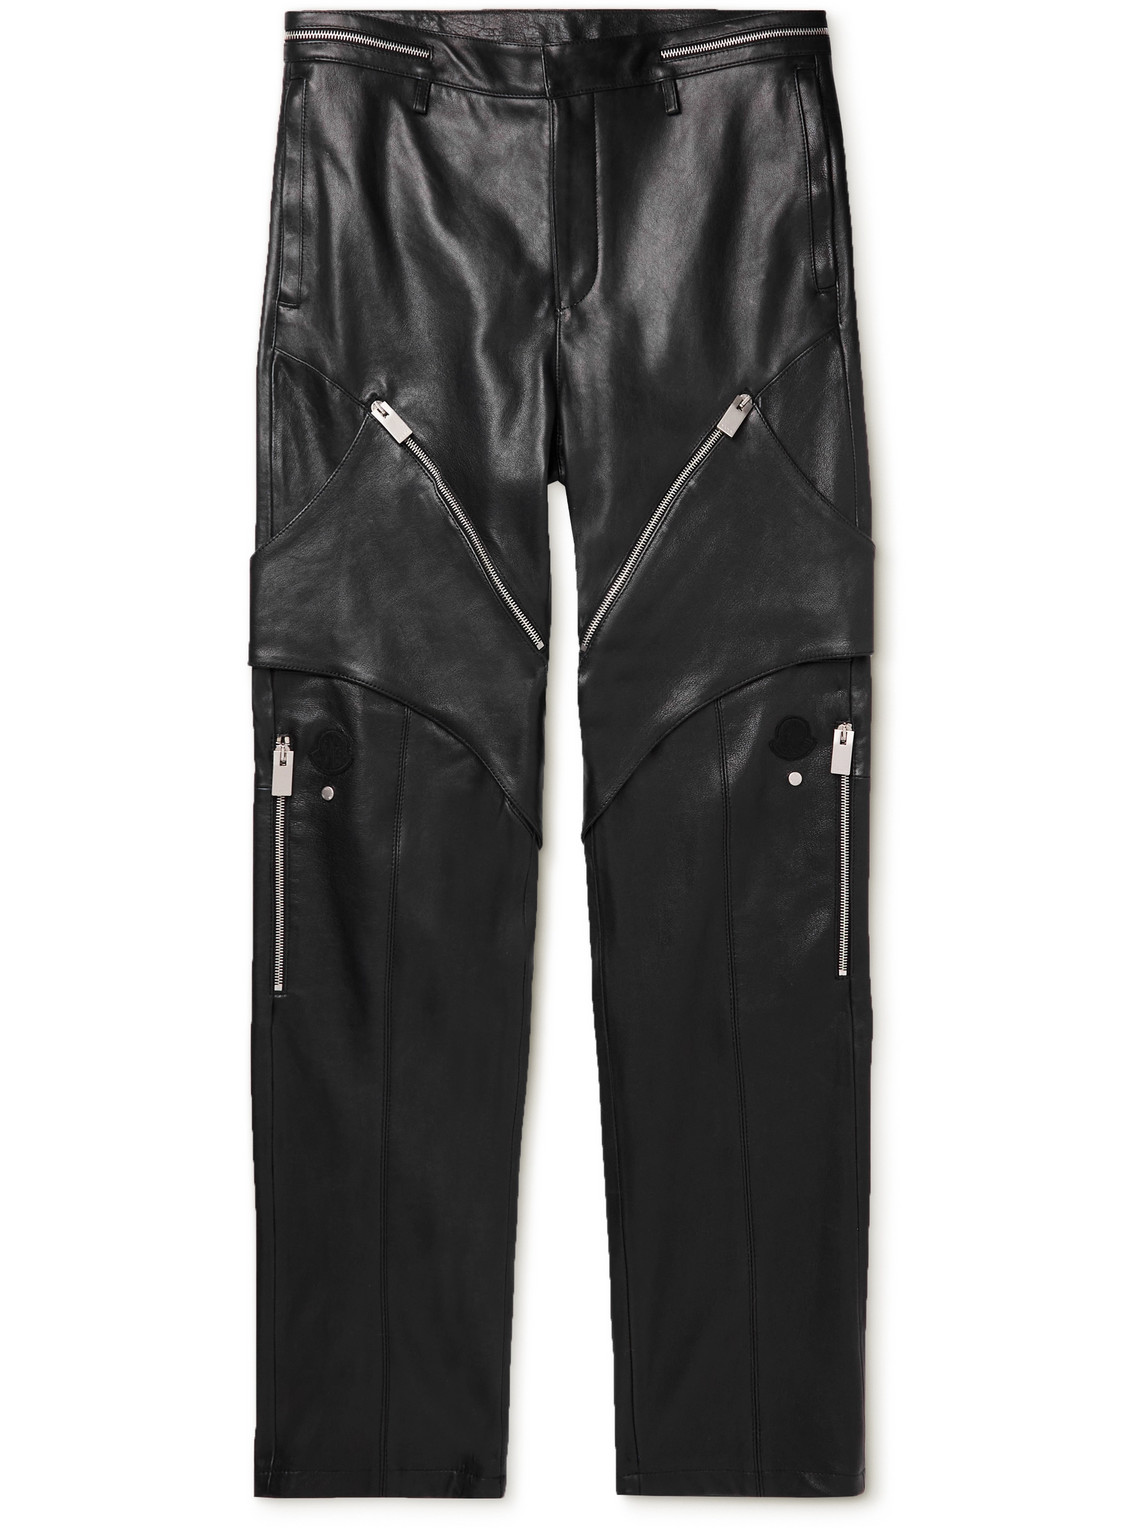 Moncler Genius Alyx Straight-Leg Panelled Zip-Embellished Leather Trousers